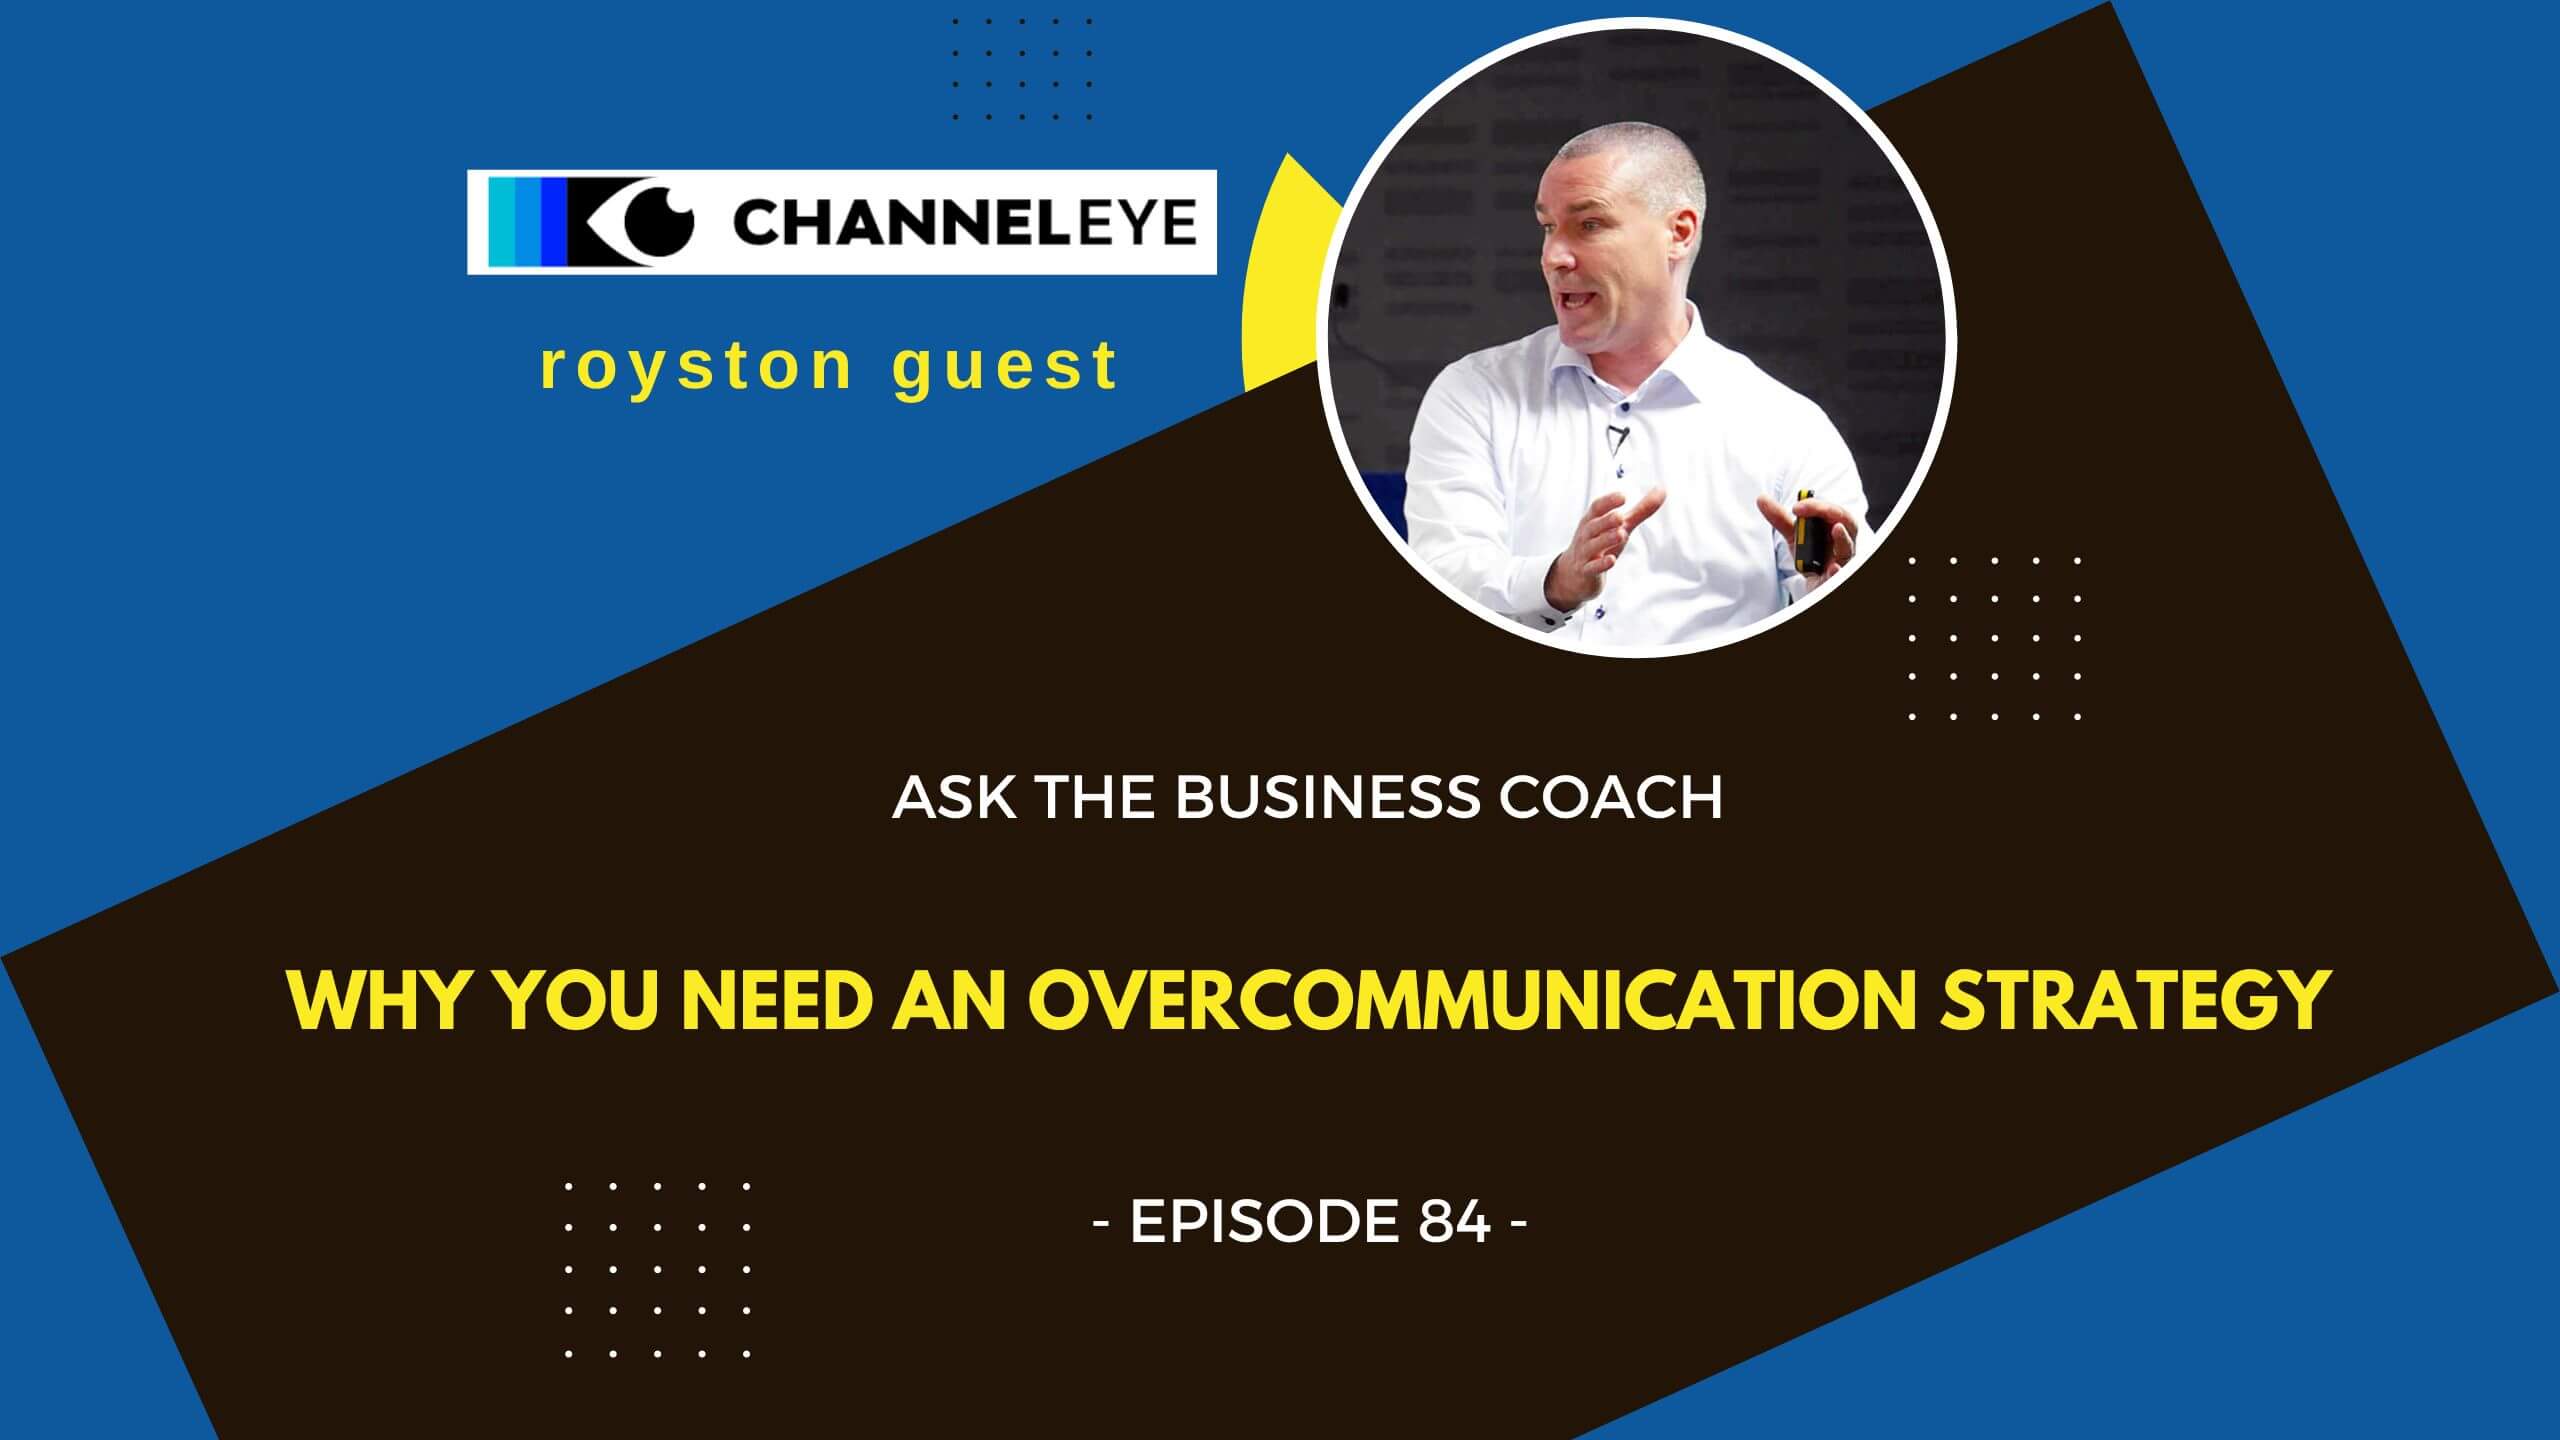 Title of Episode 84: Why you need an over communication strategy